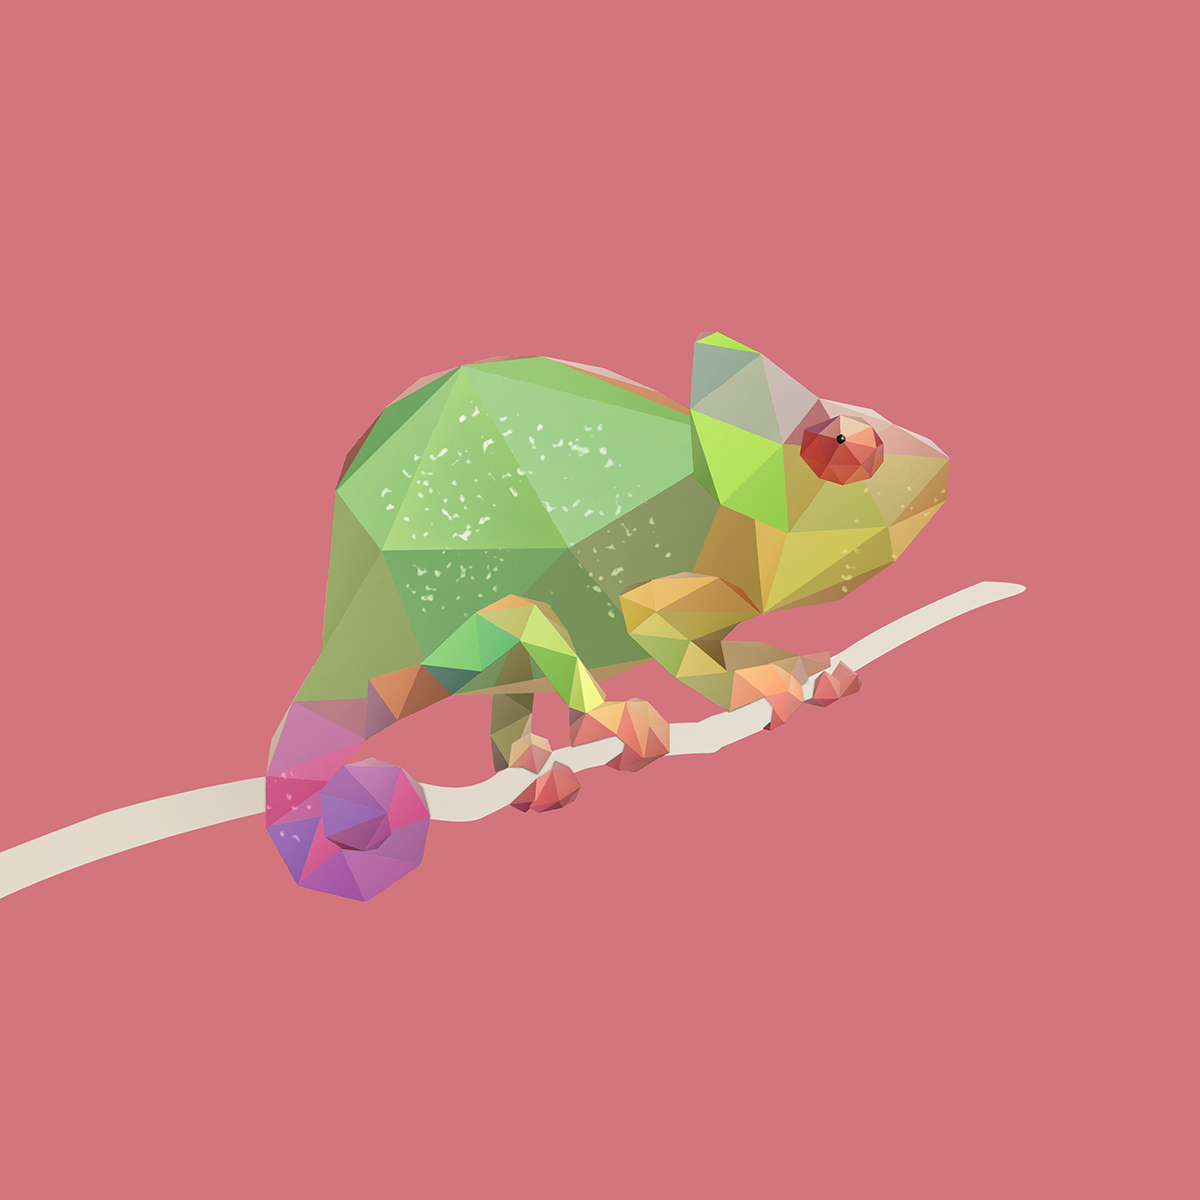 photoshop inspire Behance dribbble low polygon vector art Low Poly chameleon animals cute animals illustrations